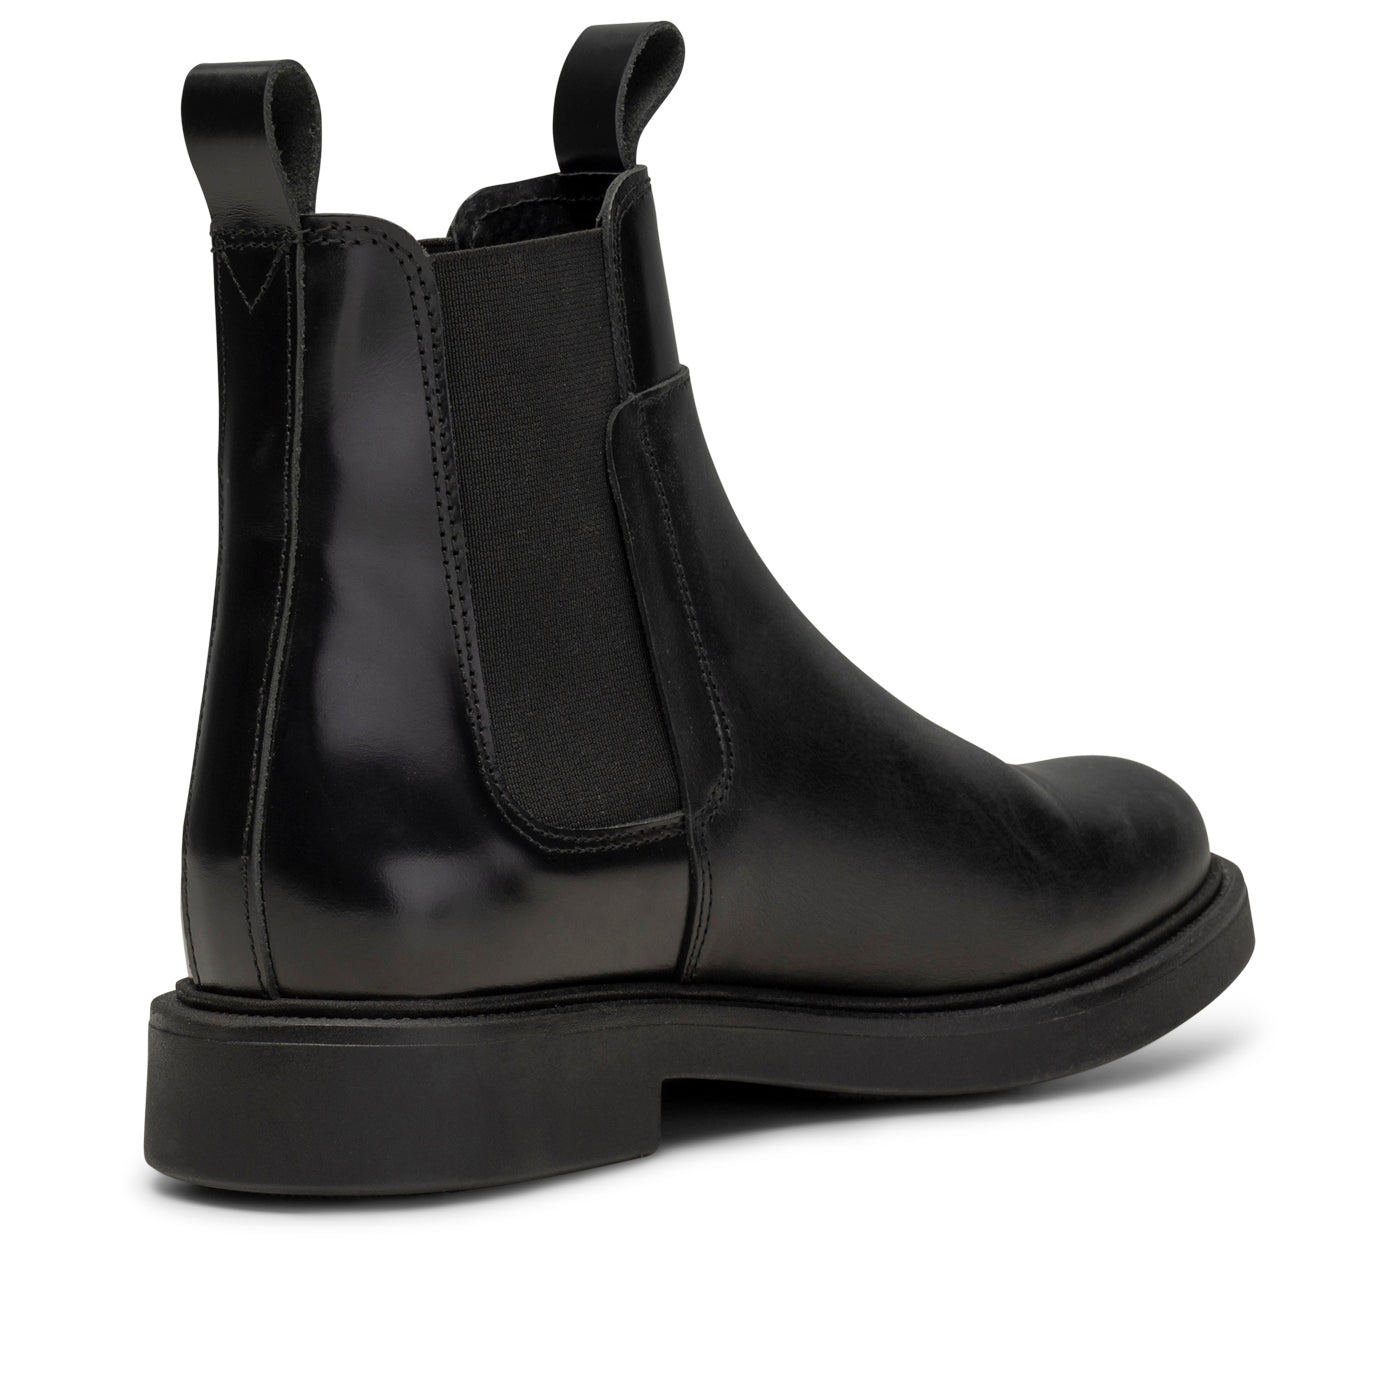 SHOE THE BEAR WOMENS Thyra chelsea boot leather Chelsea Boots 110 BLACK